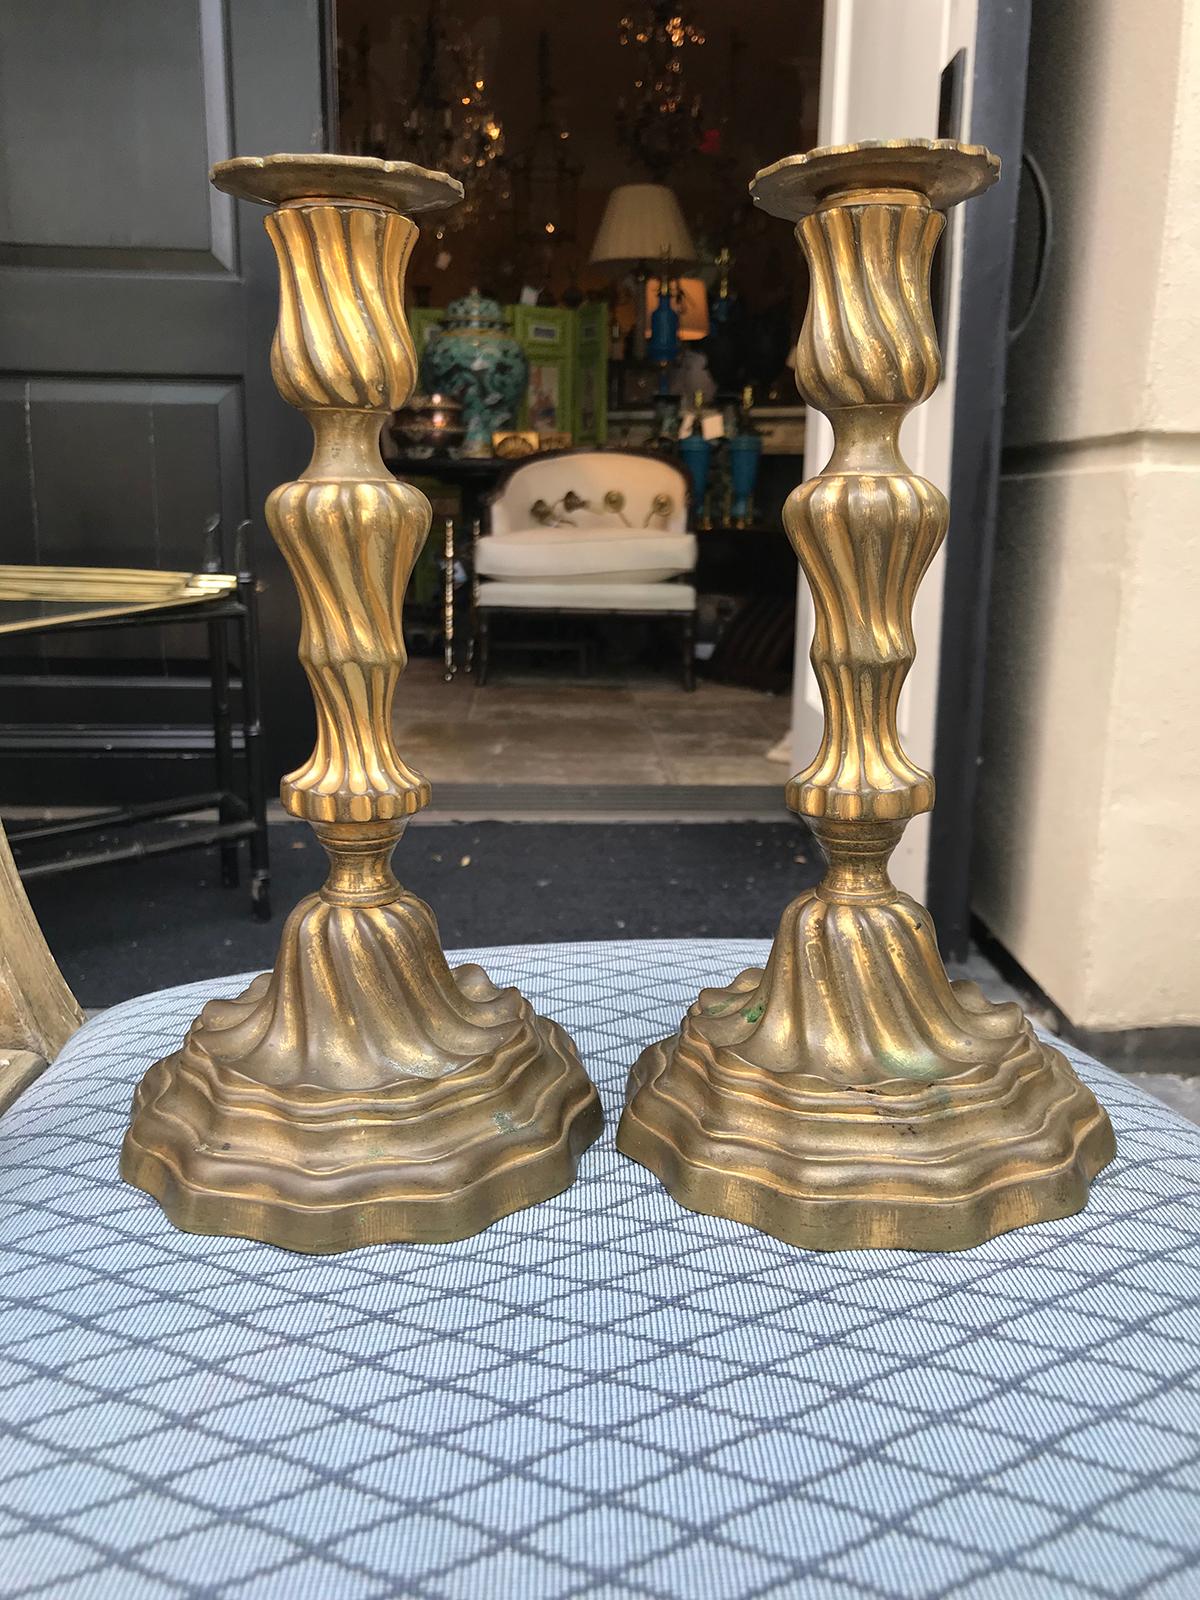 Pair of 19th century French Louis XV style brass candlesticks.